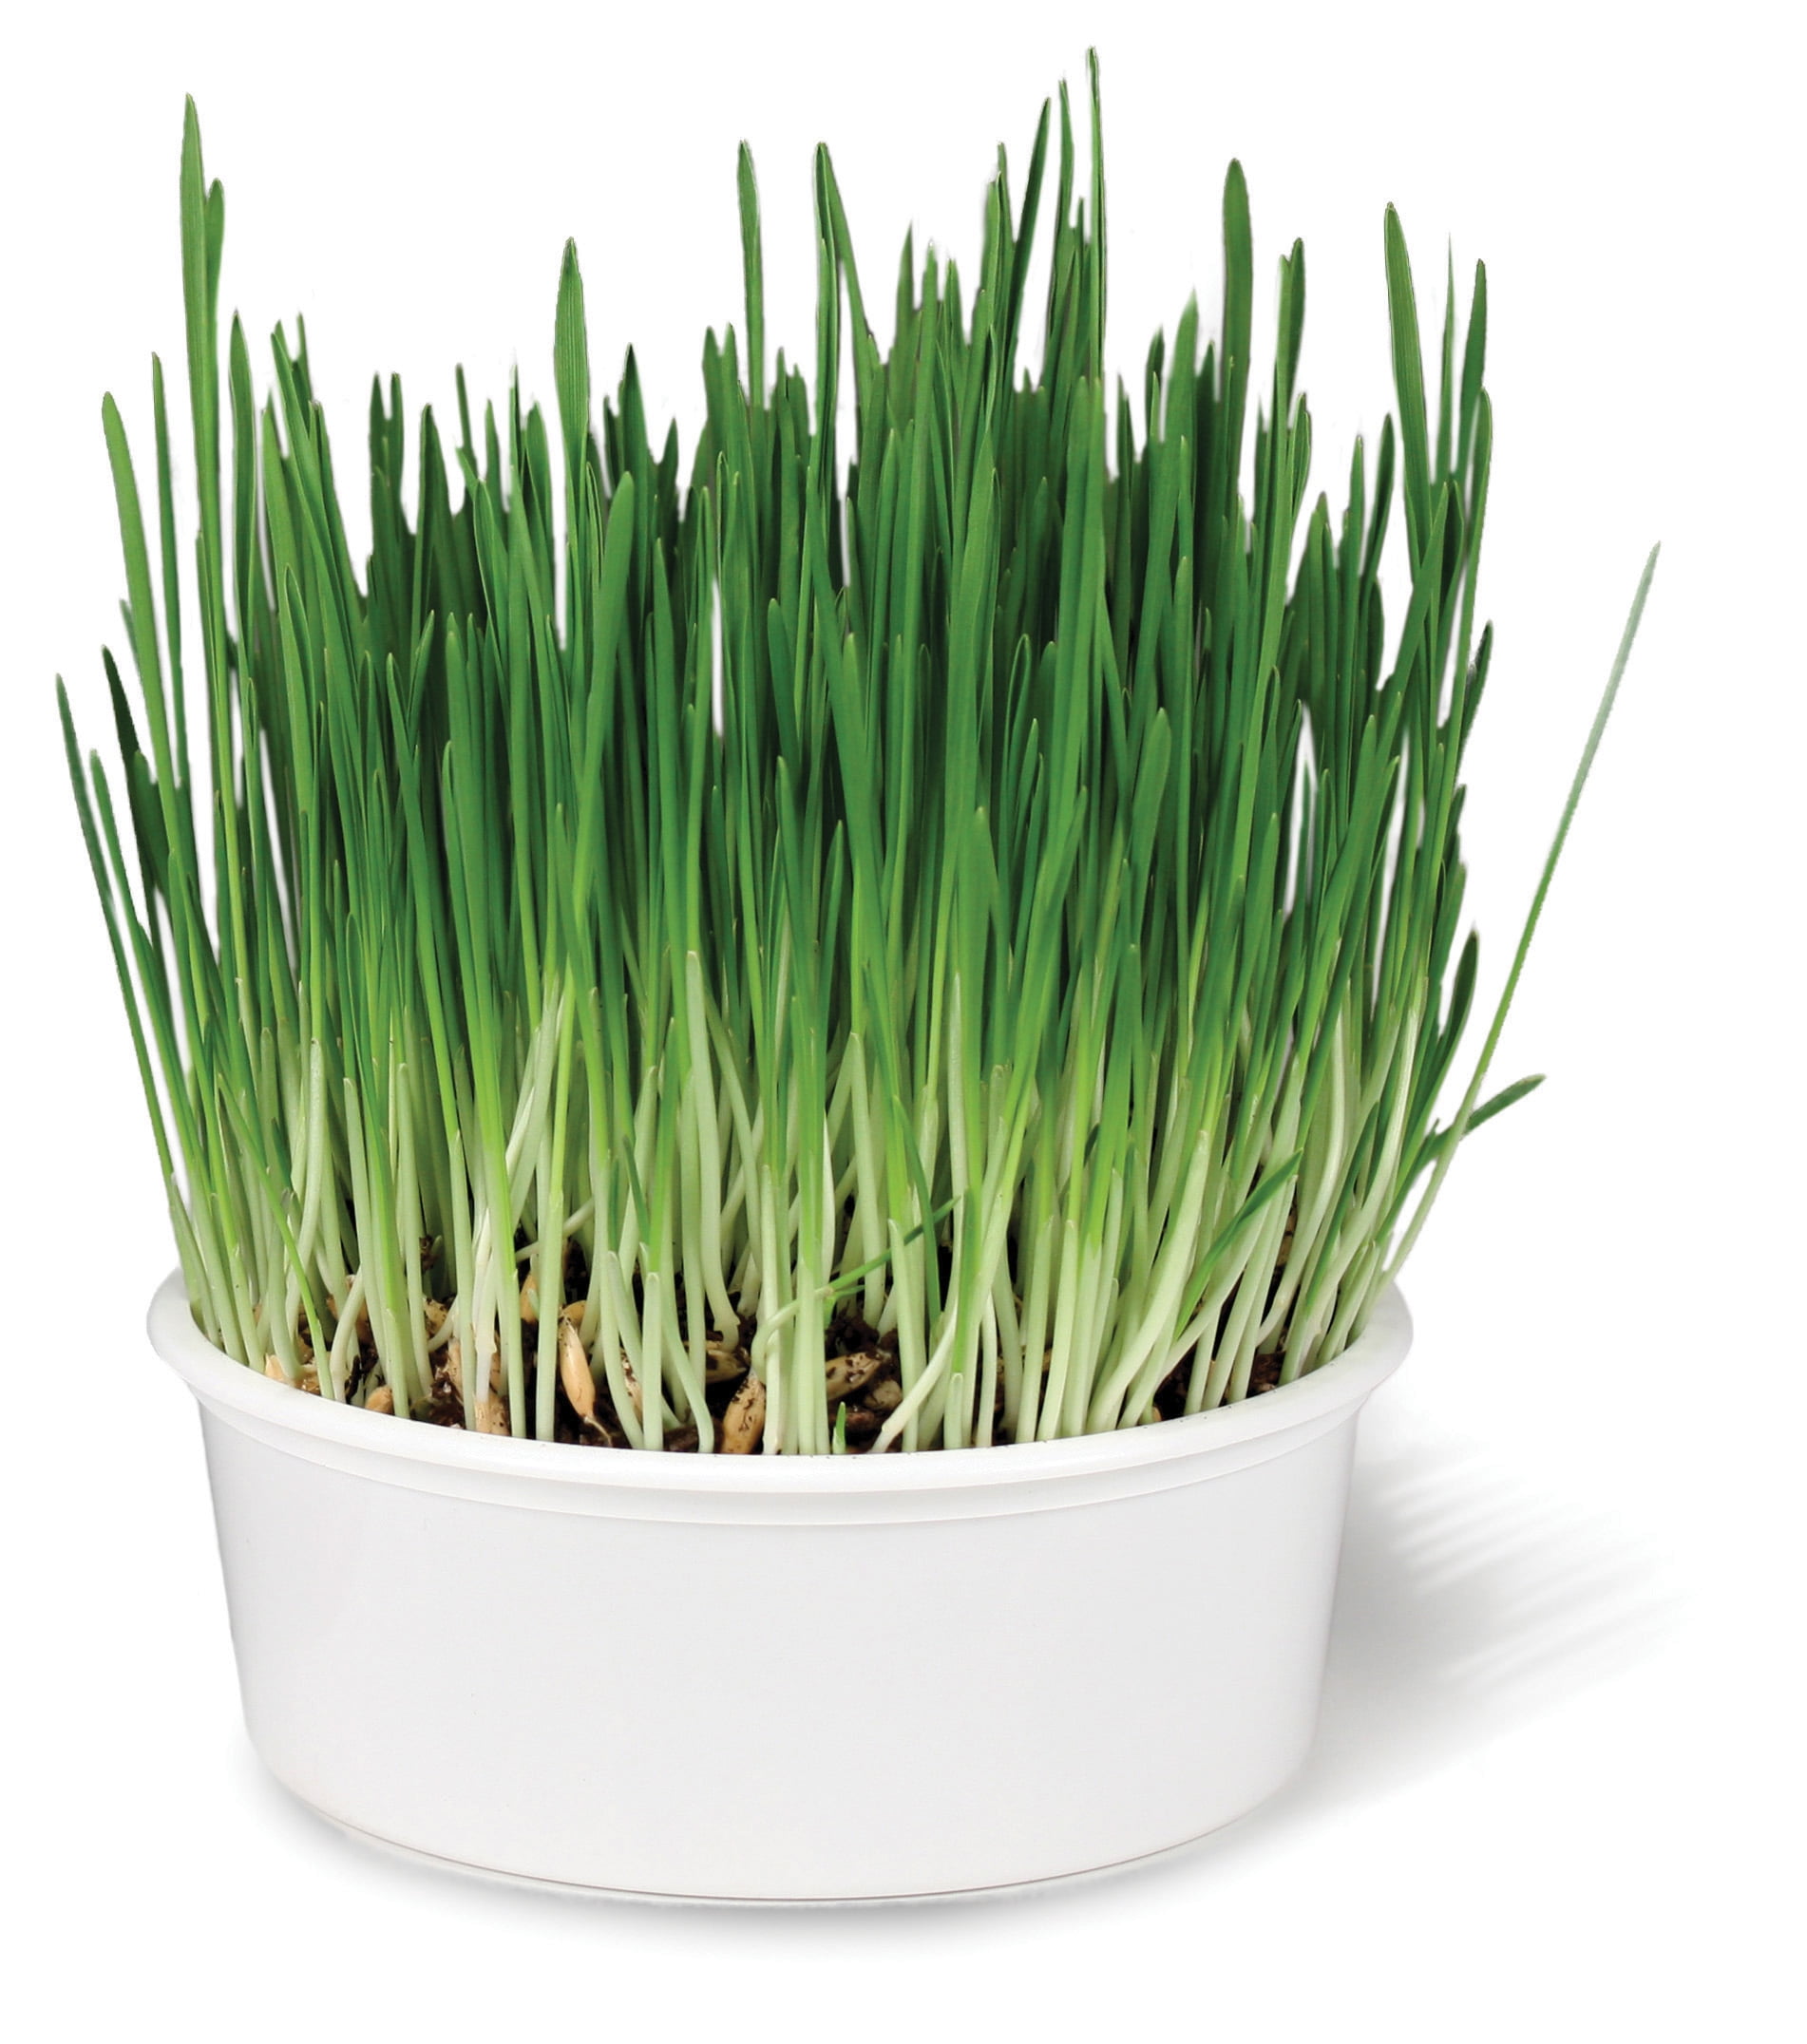 harvested cat grass 1ozapprox 800 seeds Kit Green including growing guide H O8I3 